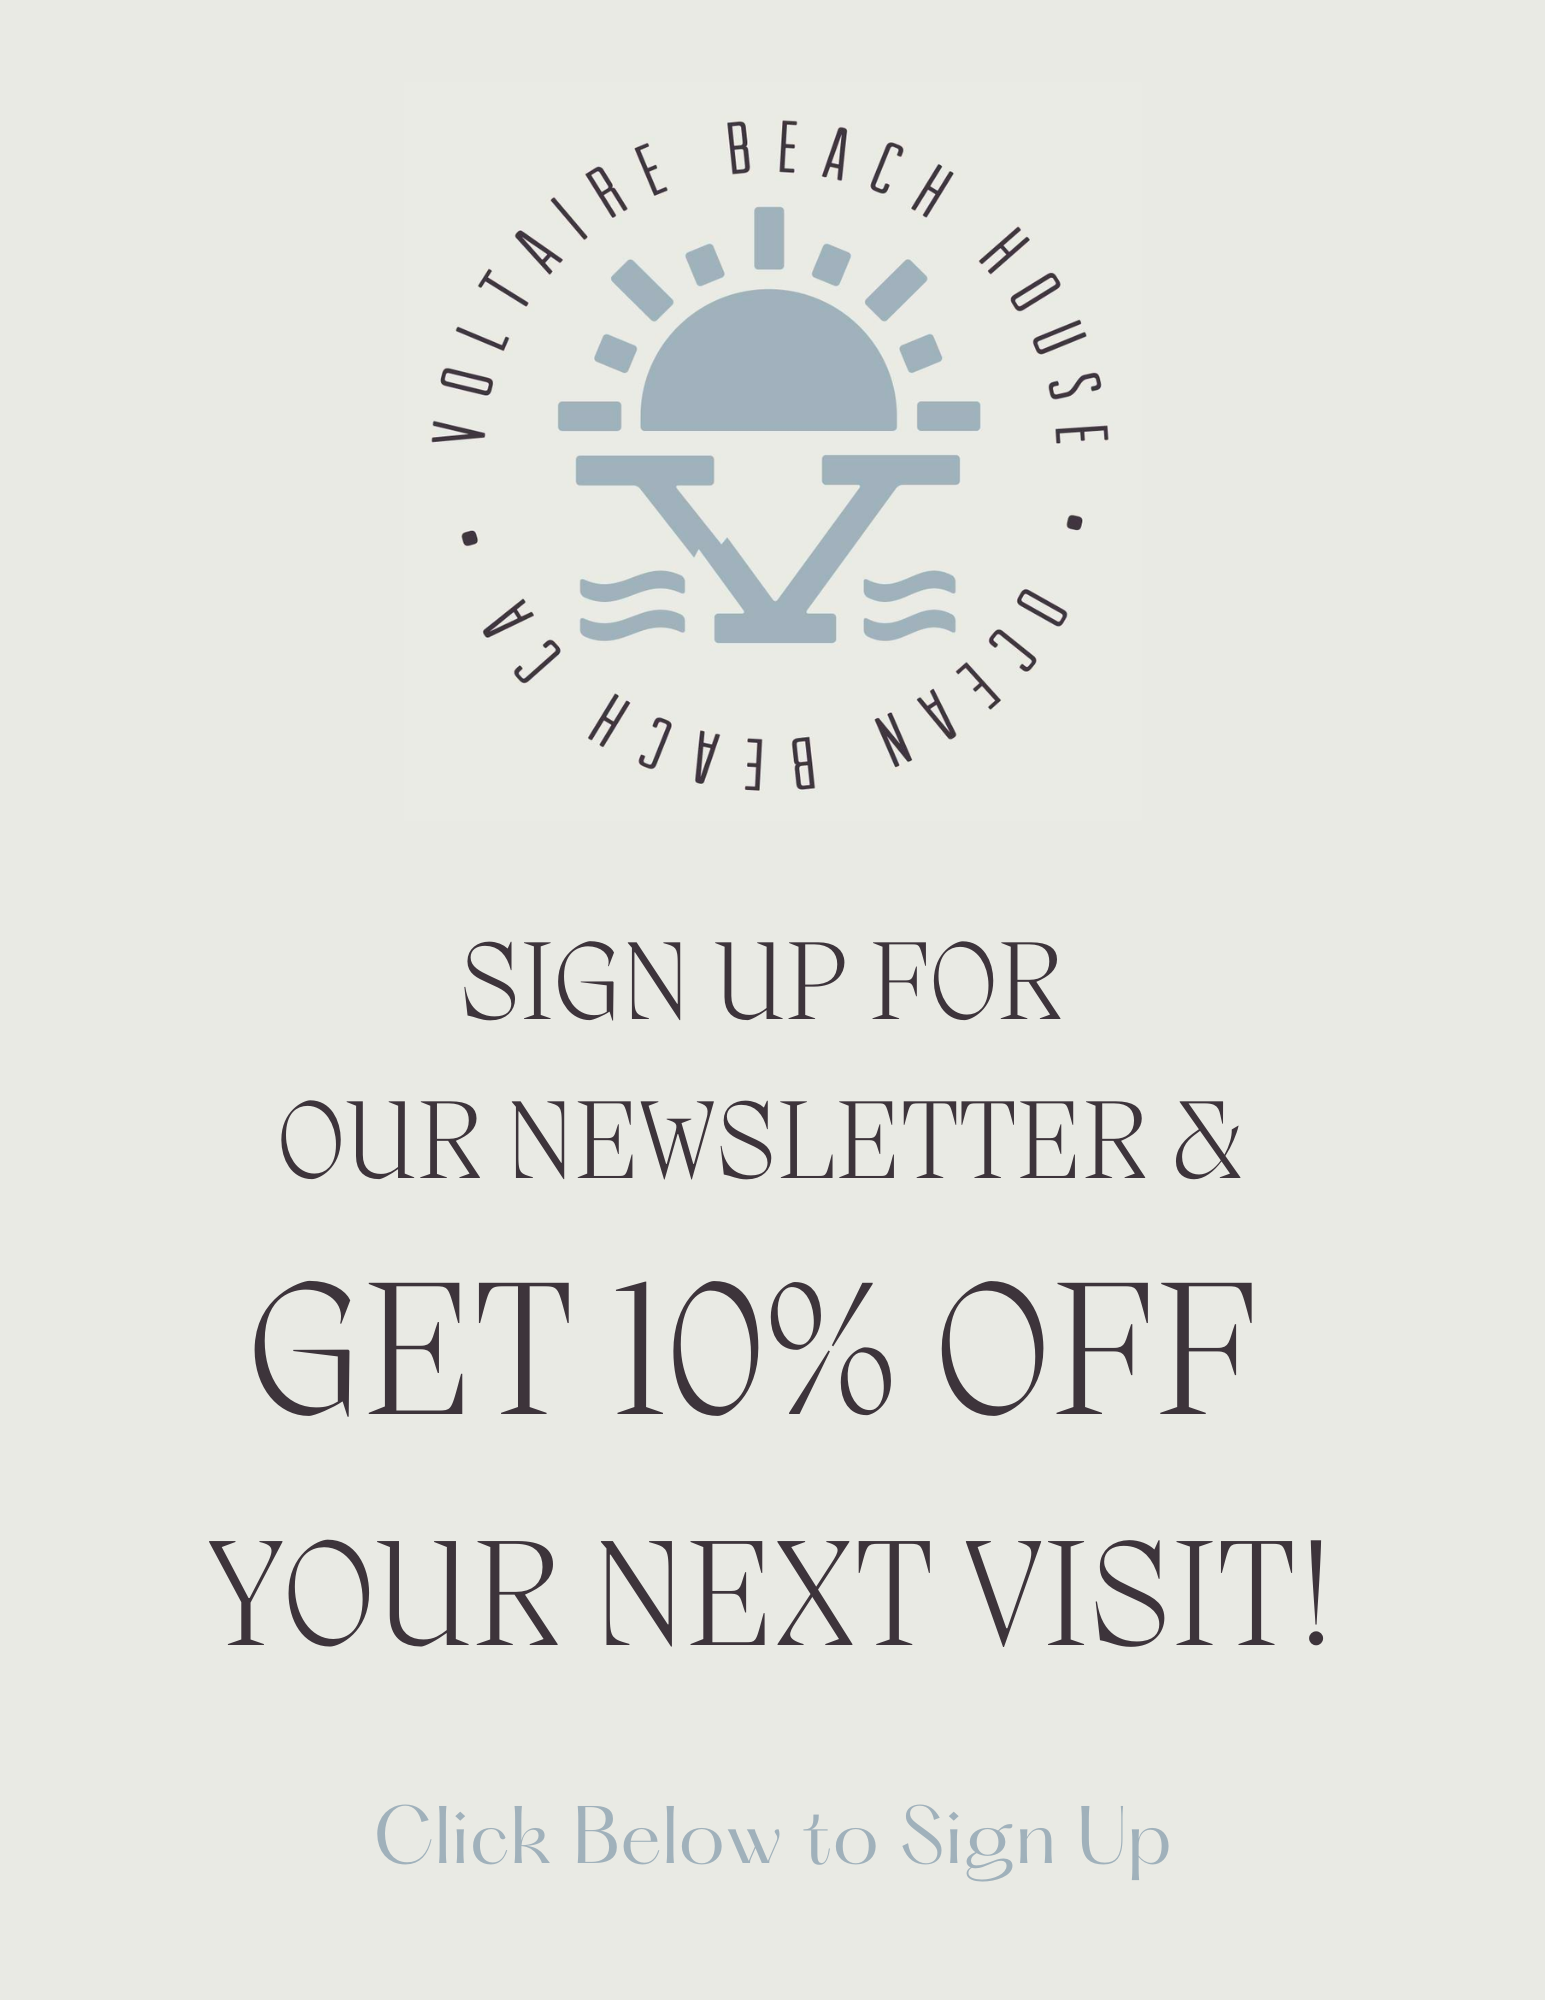 Sign Up for Our Newsletter & Get 10% Off your Next Visit